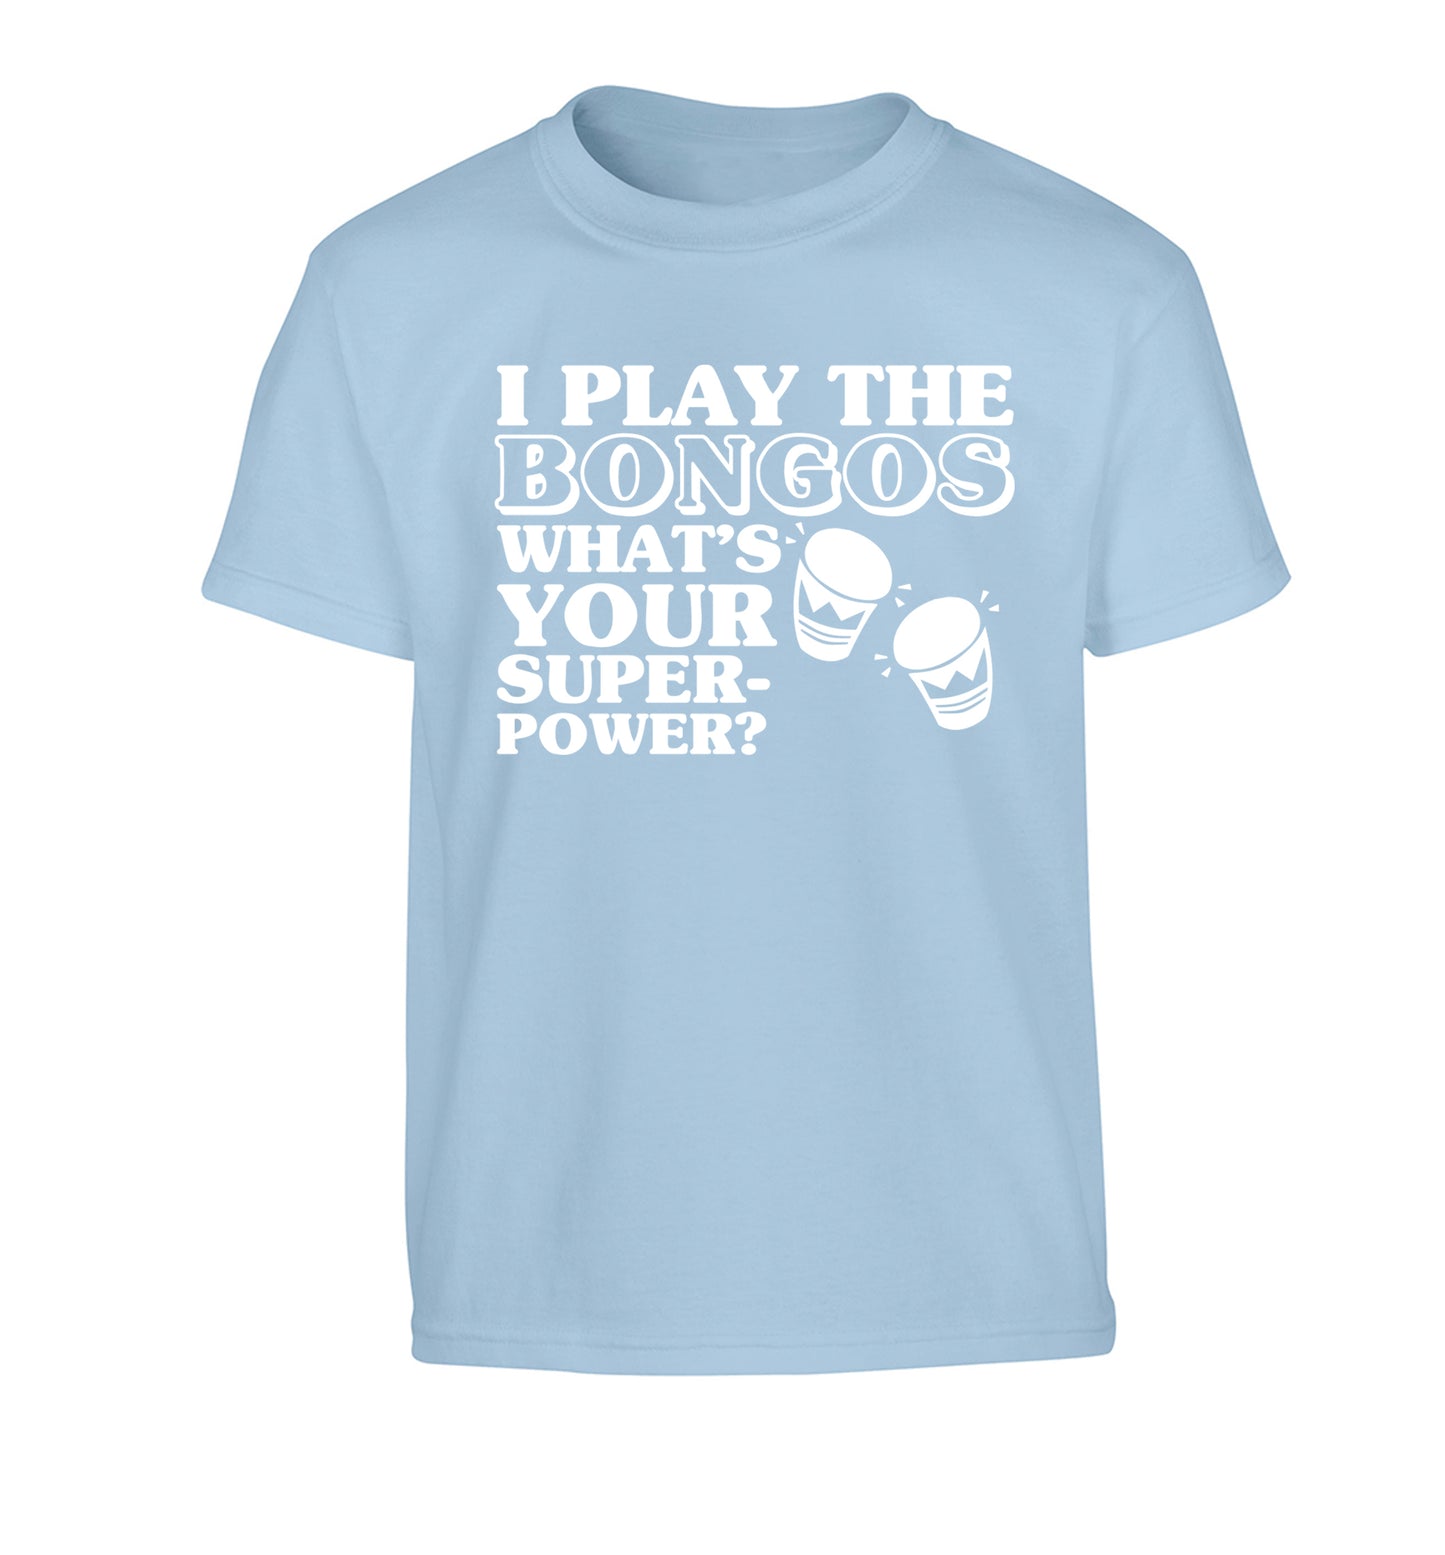 I play the bongos what's your superpower? Children's light blue Tshirt 12-14 Years